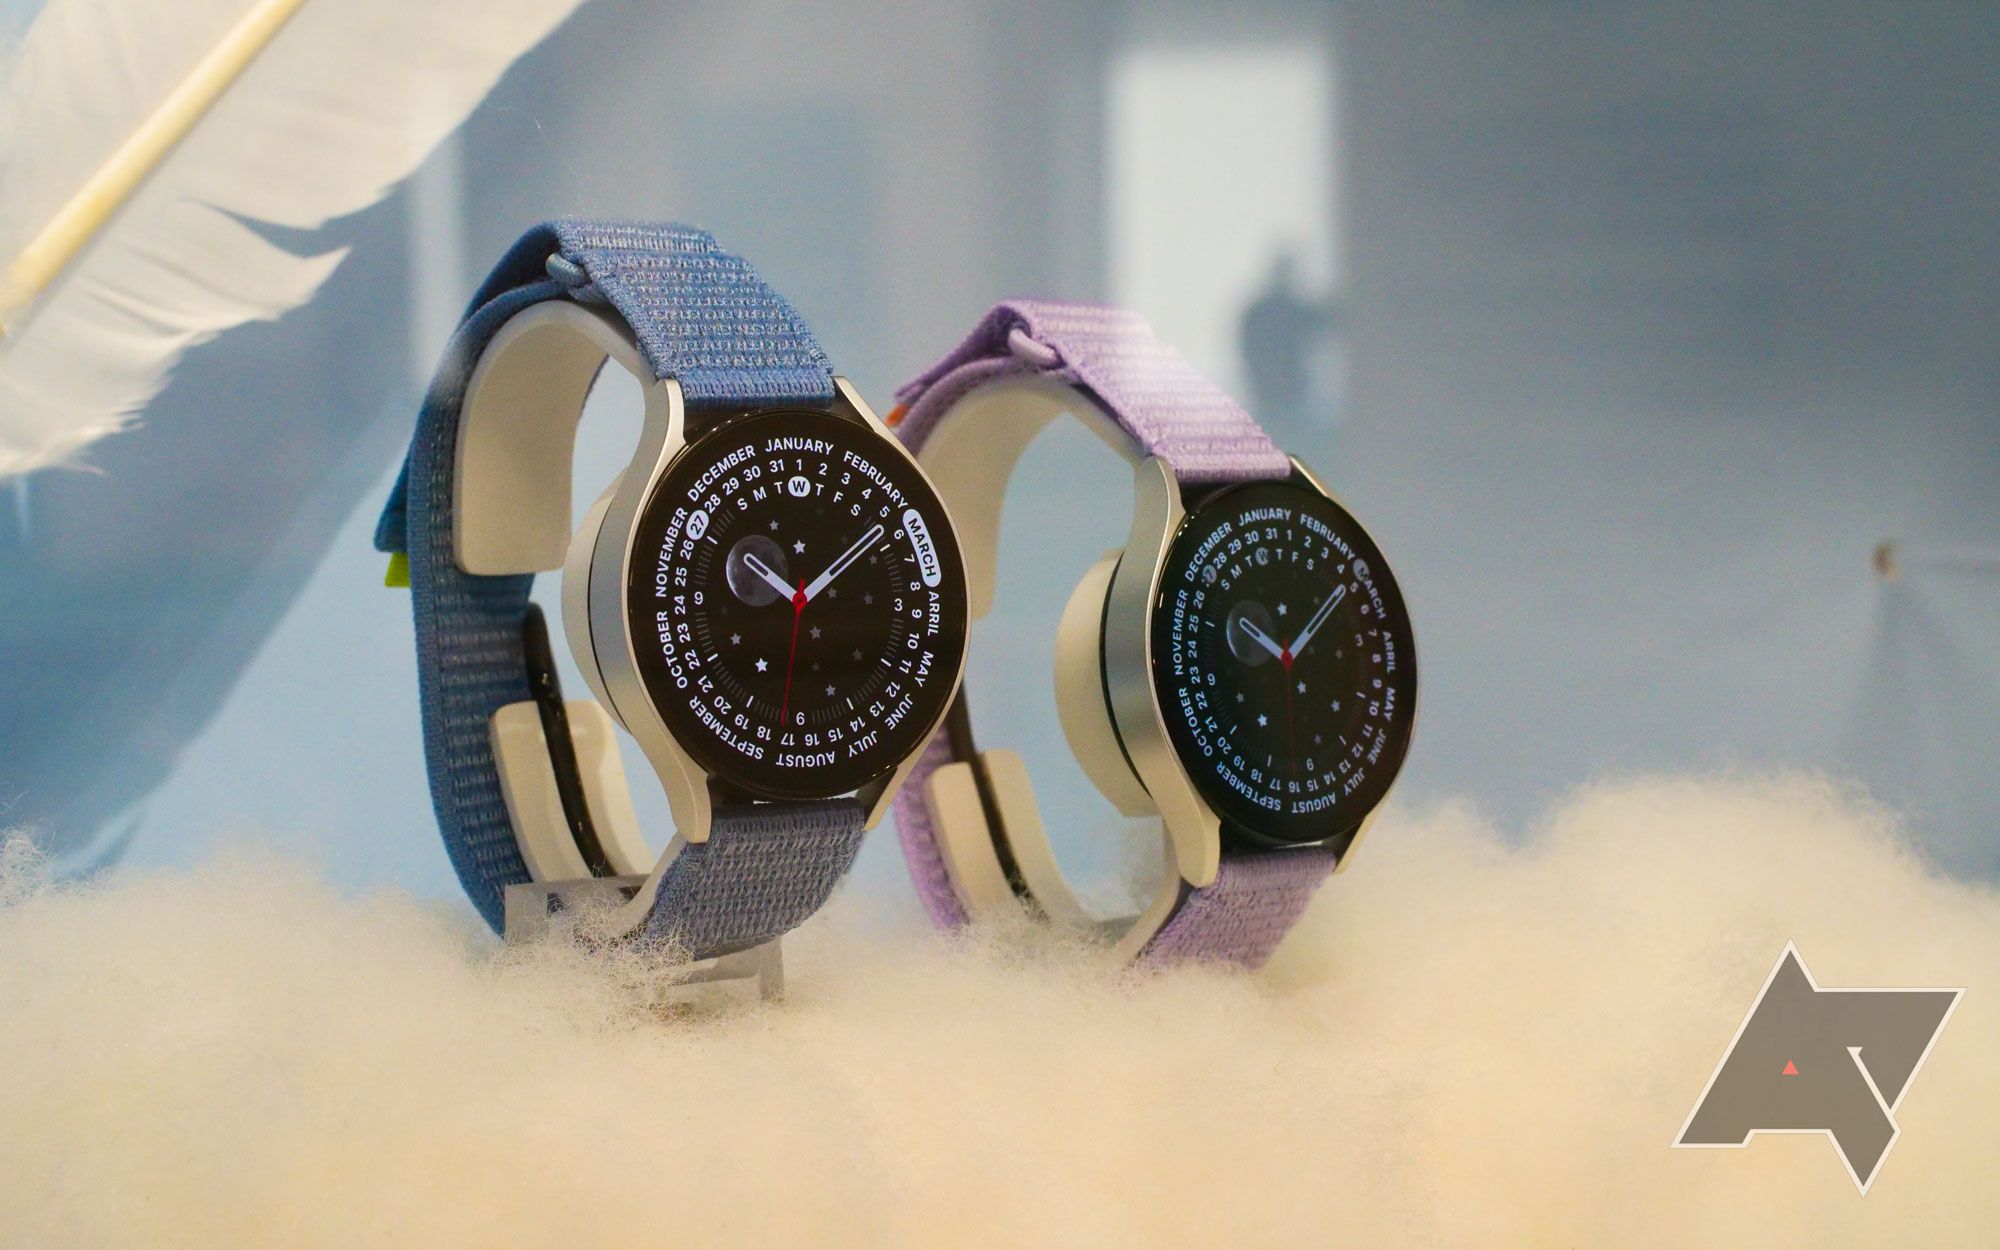 Two Samsung Galaxy Watch 6 watches, one with a blue strap and the other with a pink strap